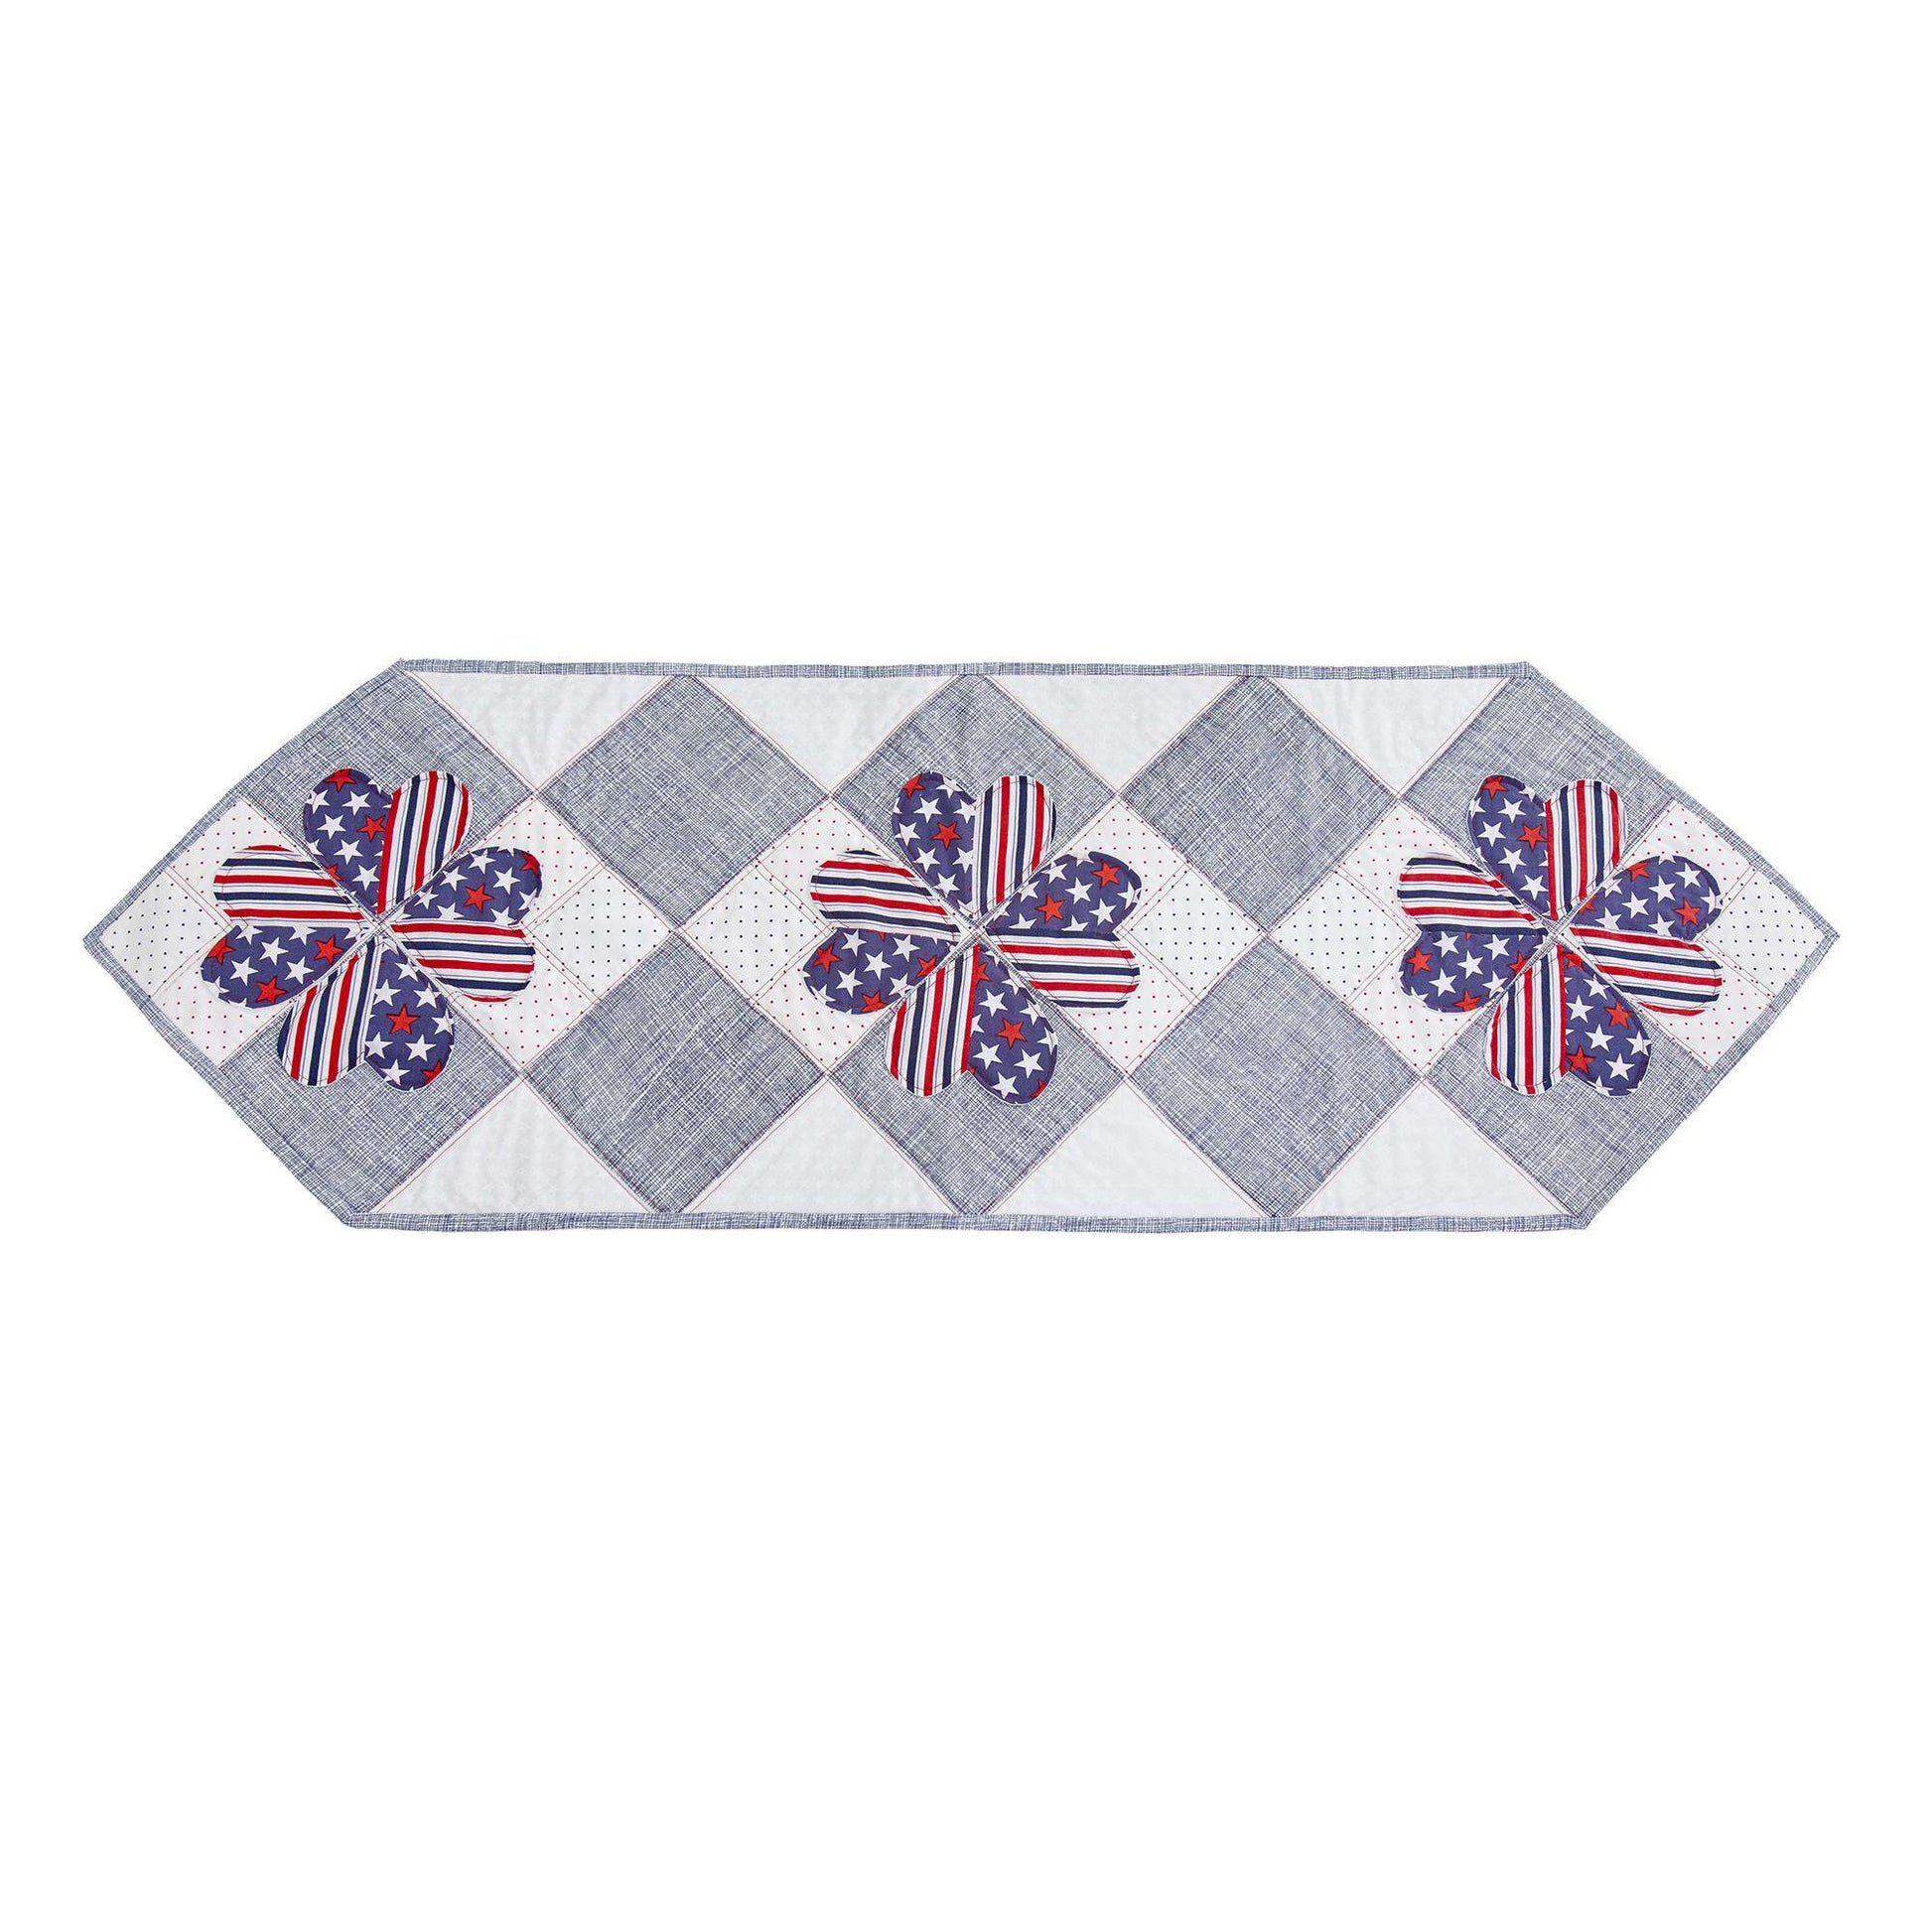 Free Coats & Clark Patriotic Love Table Runner Quilting Pattern